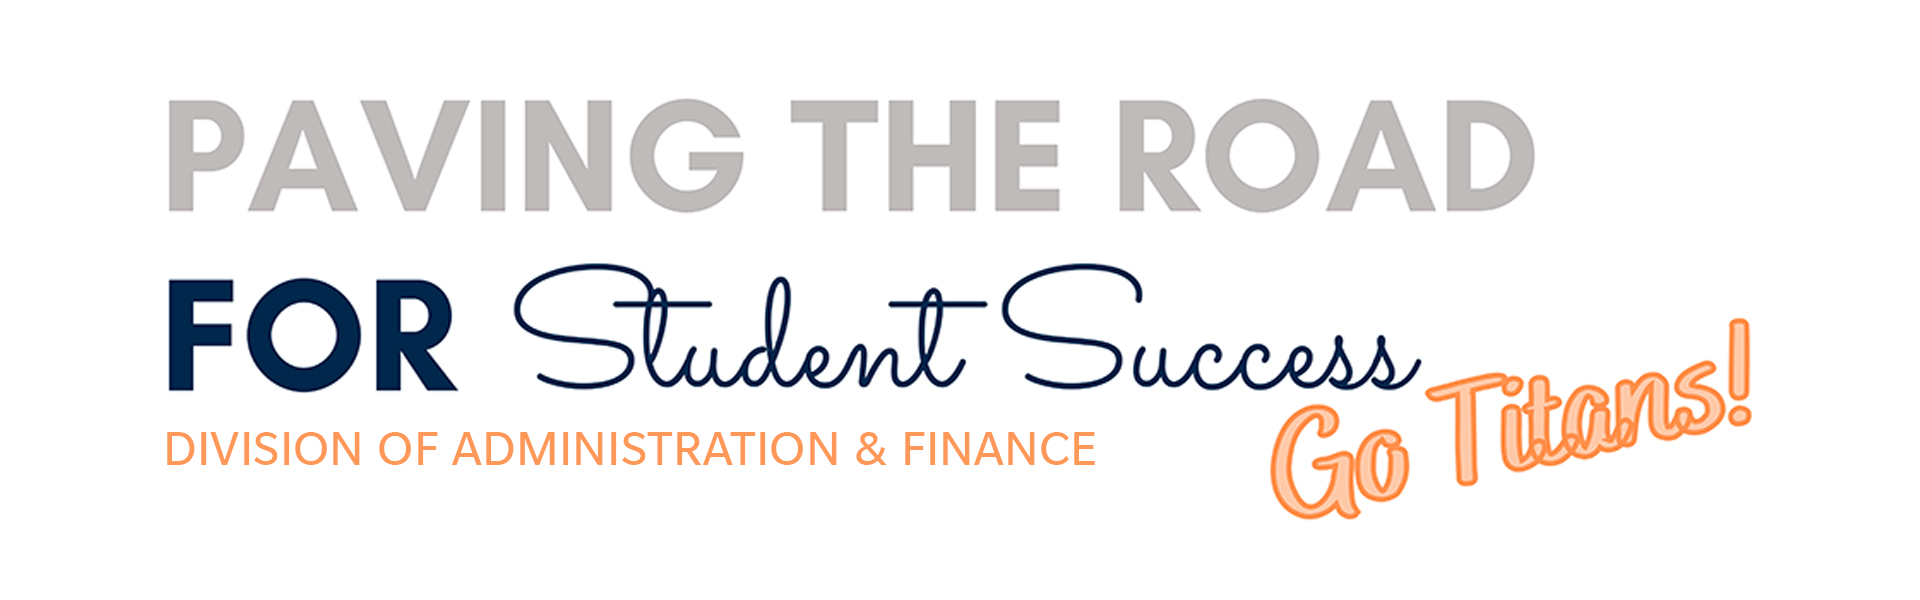 Paving the Road for Student Success Go Titans